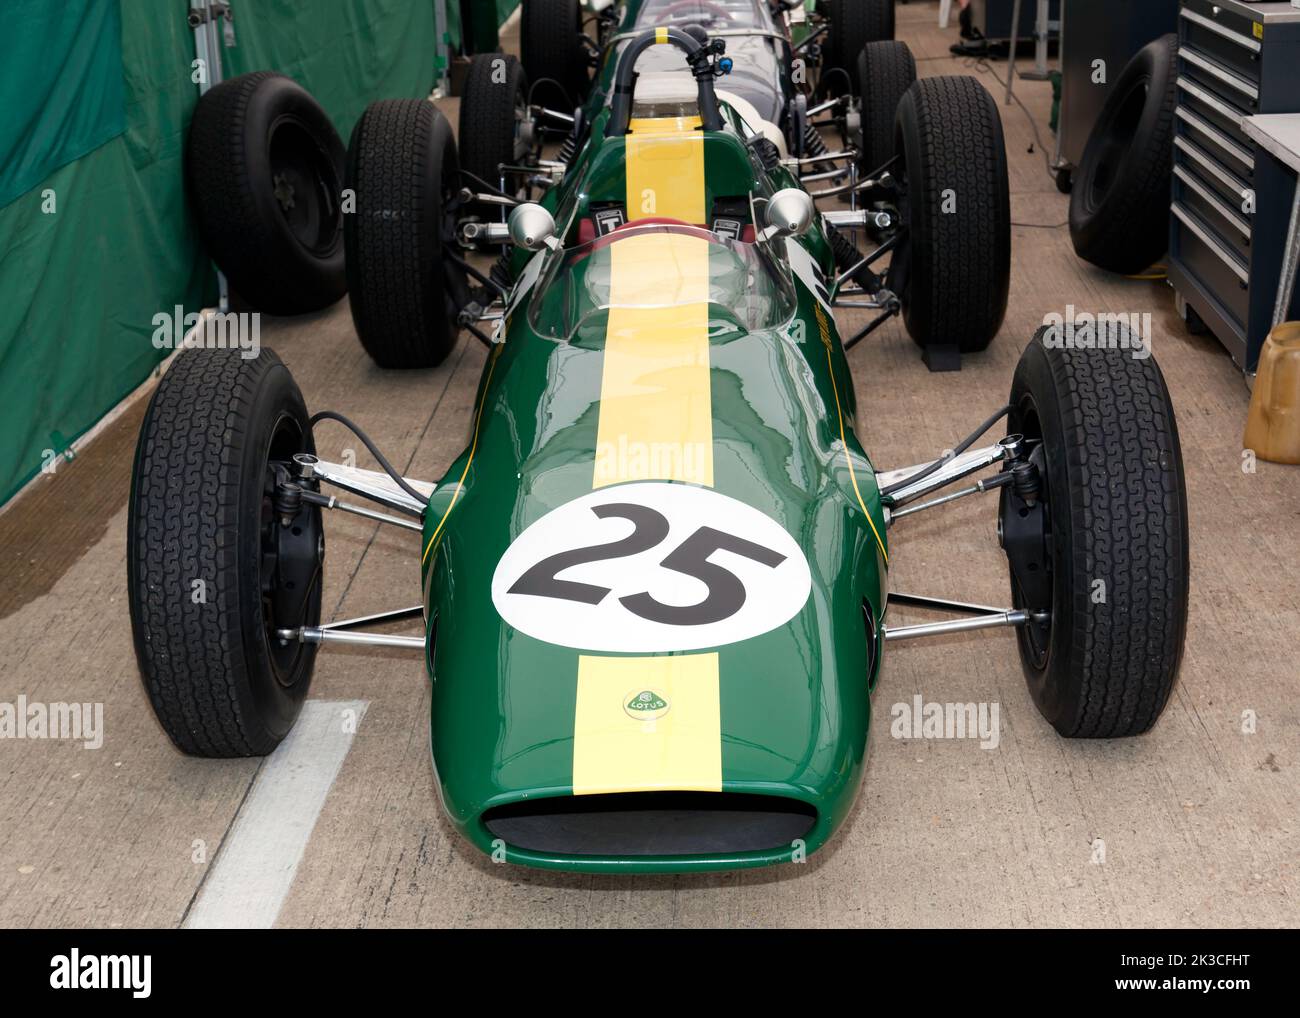 Jim Clark's 1962/63 Lotus 25: the car he won his first F1 world title in, now driven by Andy Middlehurst in the HGPCA Pre '66 Grand prix Cars Stock Photo